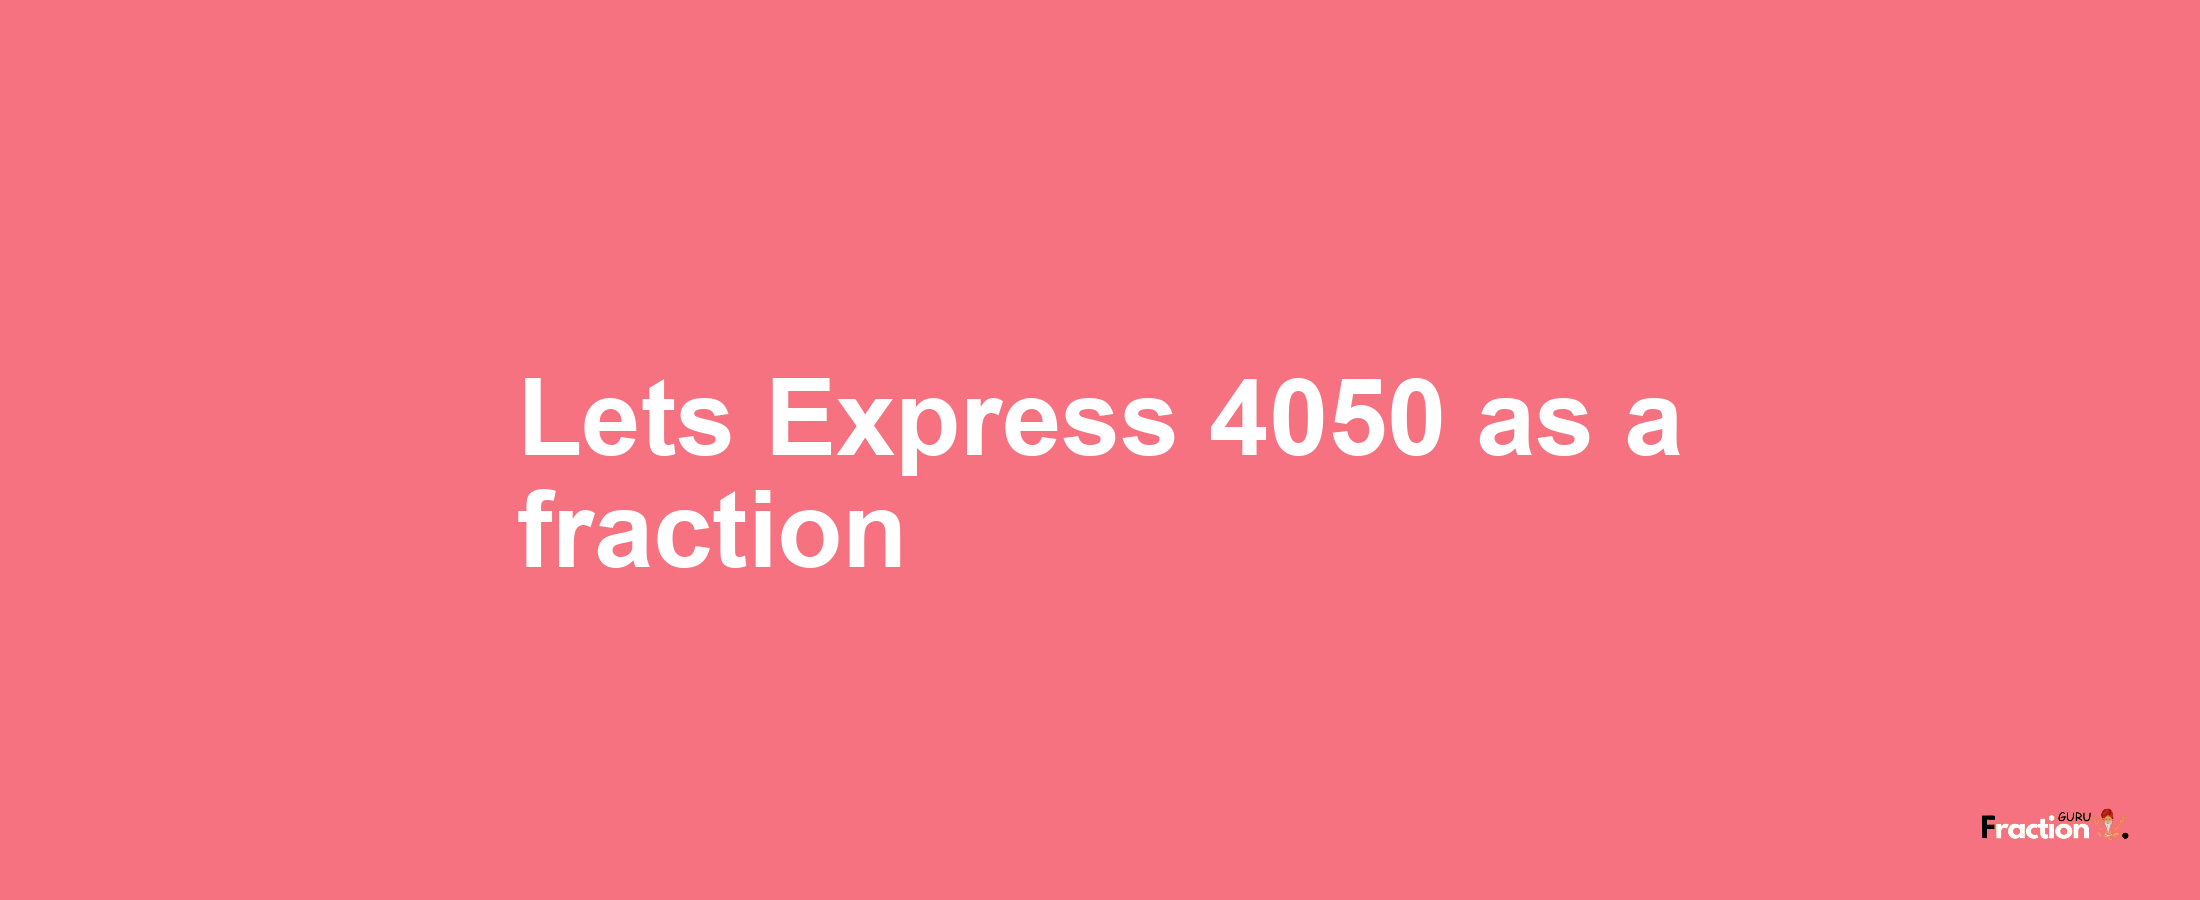 Lets Express 4050 as afraction